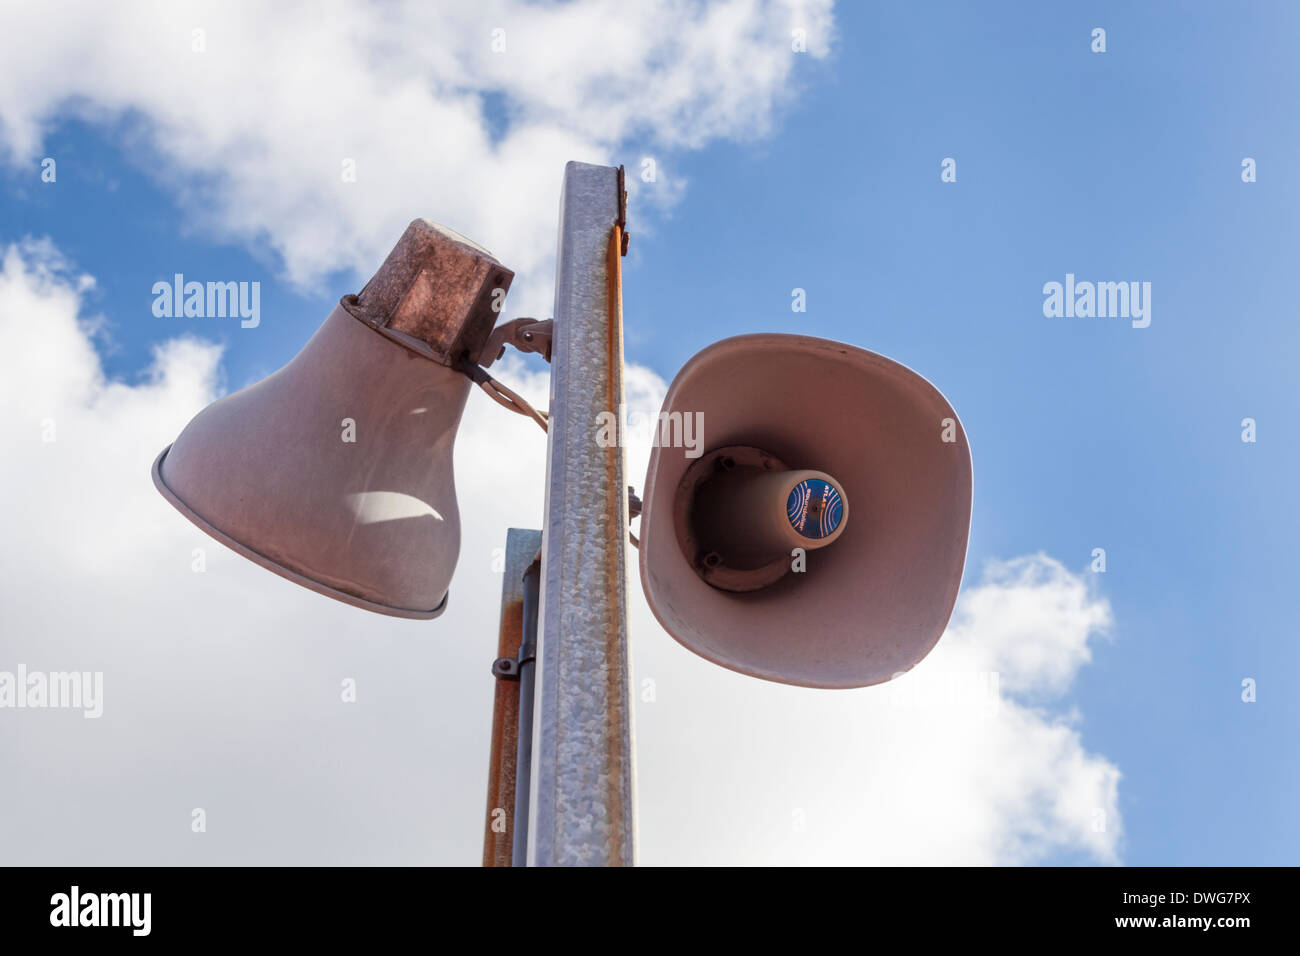 Looking up at Atlas Soundolier outdoor public address system (P A system) speakers, England, UK Stock Photo